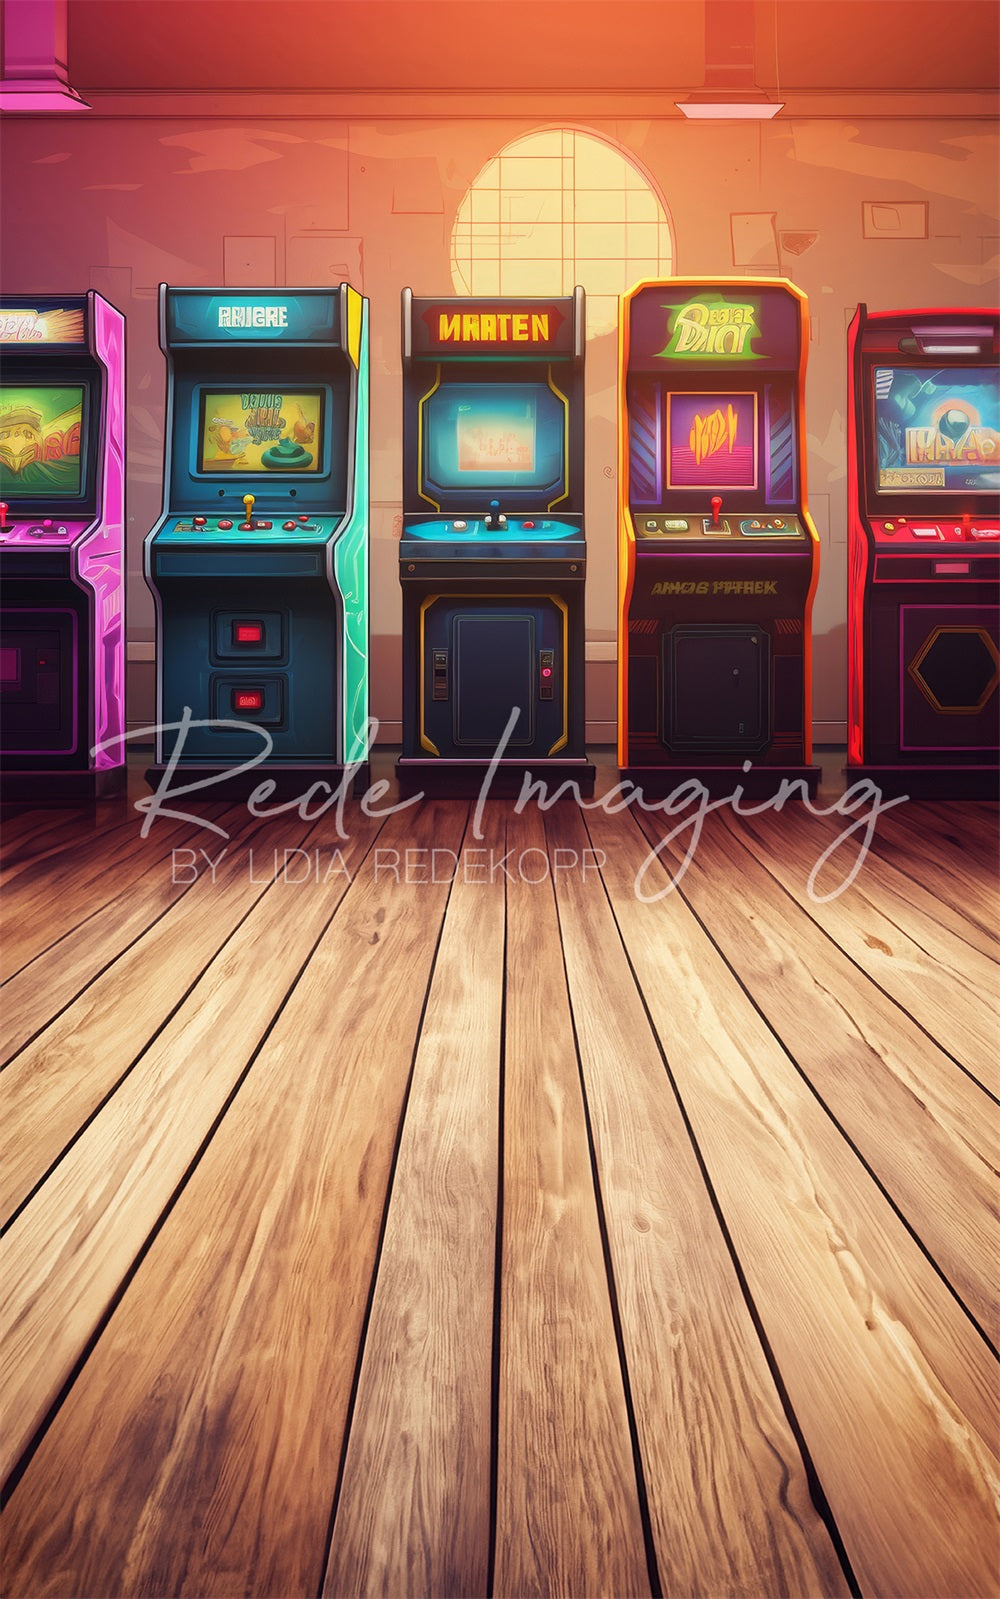 Kate Sweep Retro Cartoon Colorful Game Arcade Backdrop Designed by Lidia Redekopp